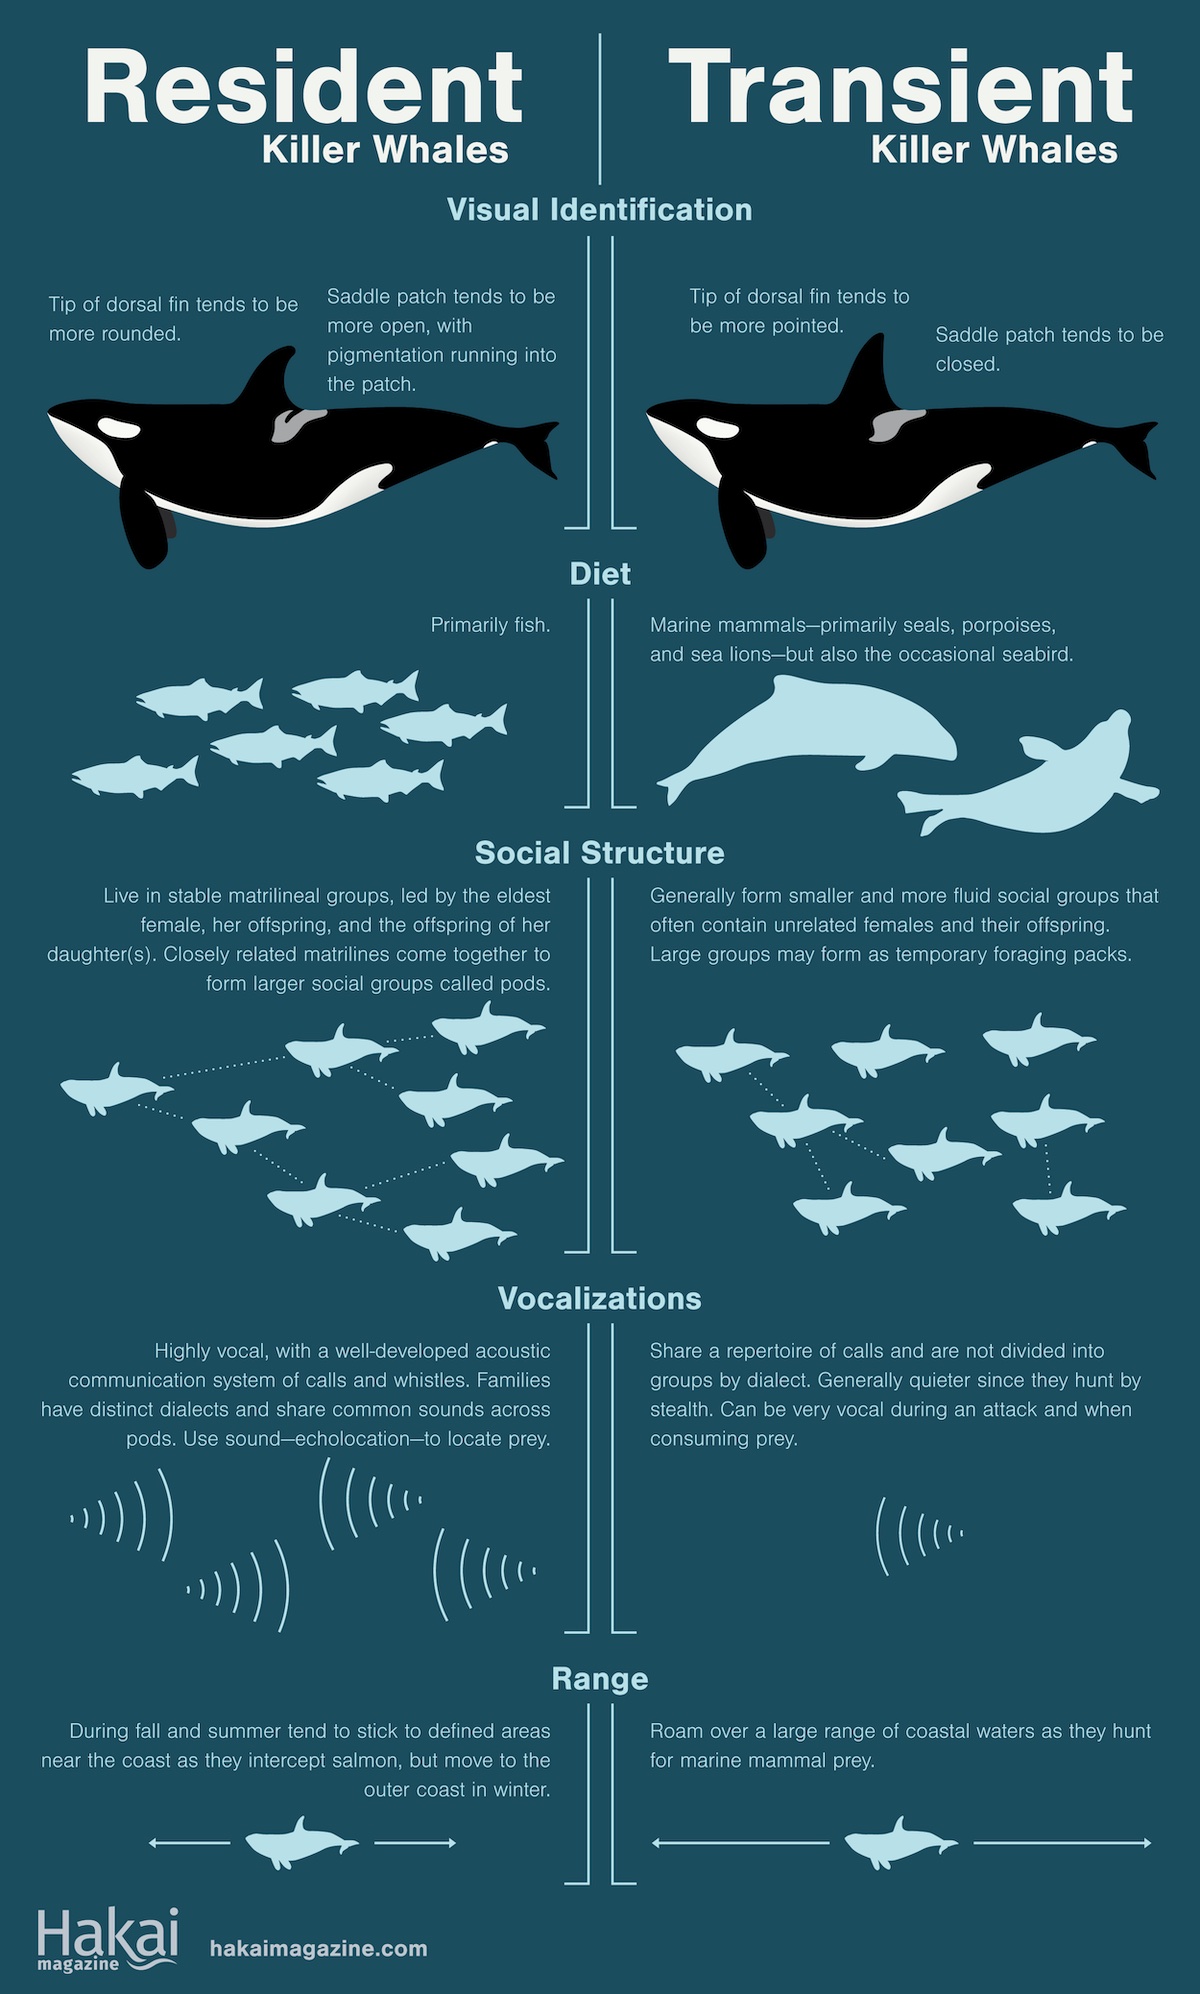 An infographic shows the differences between resident and transient killer whales, including visual identification, diet, social structure and vocalizations.